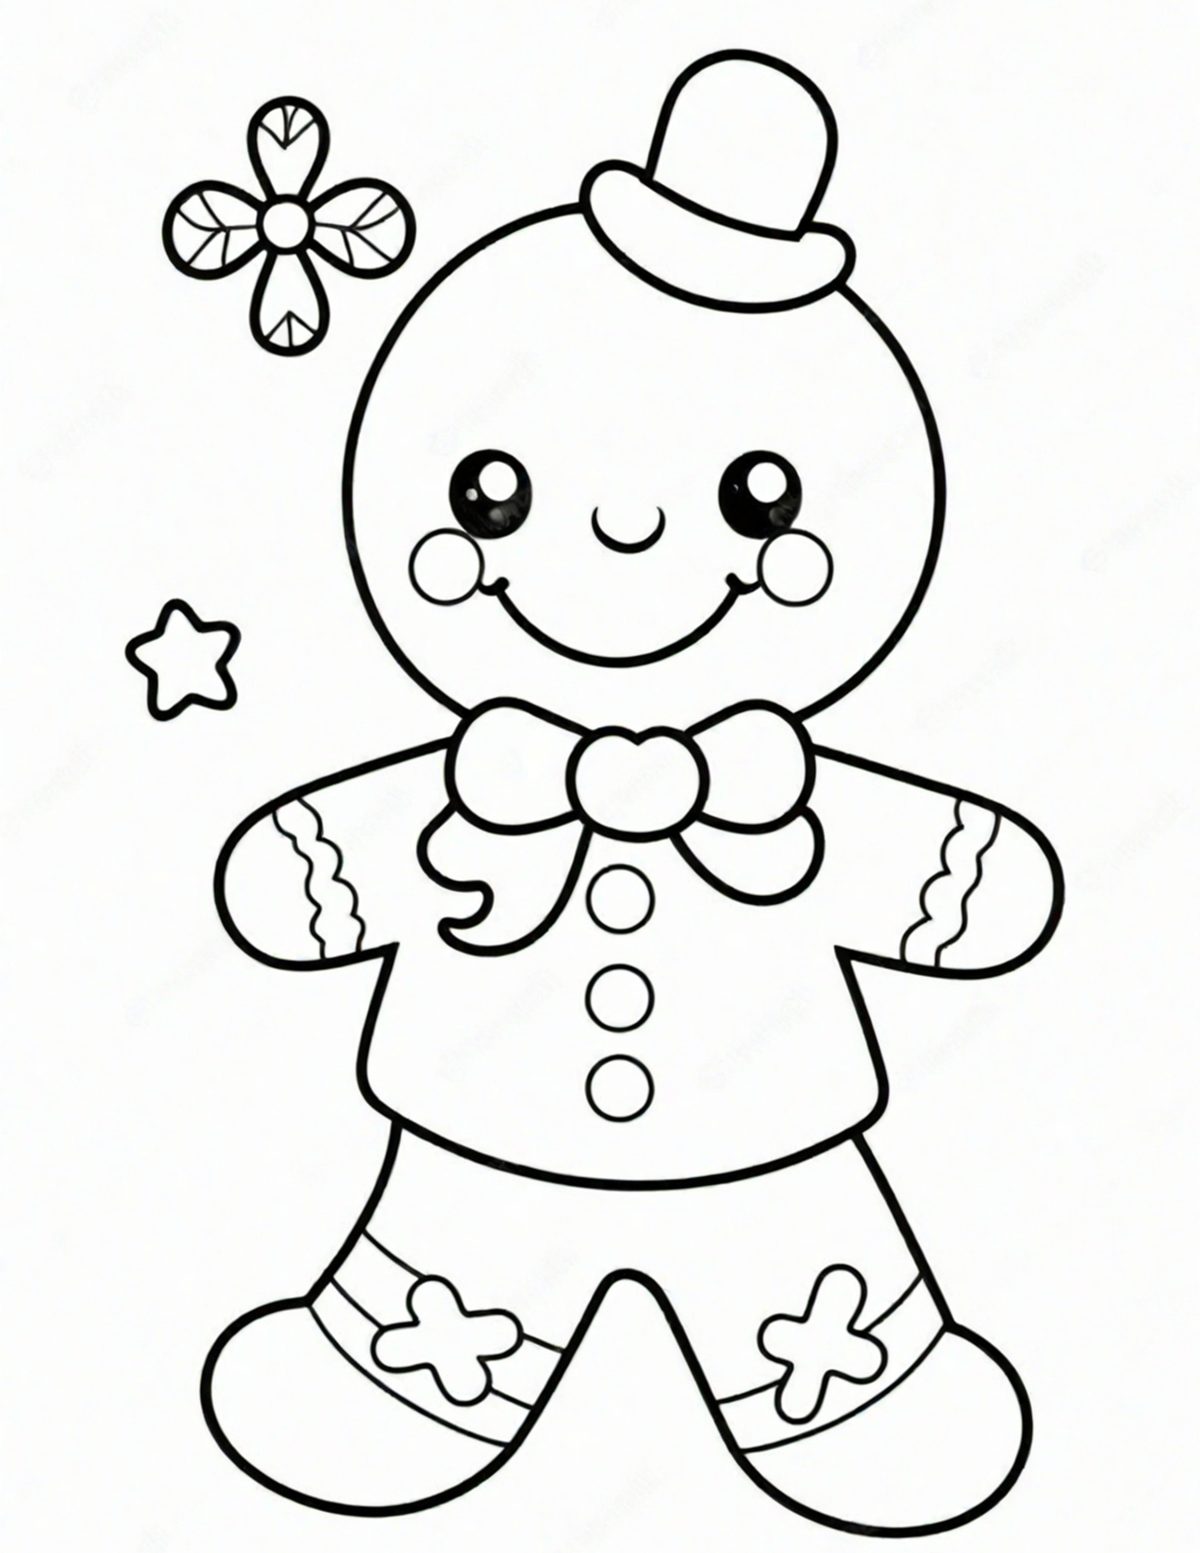 free printable gingerbread man coloring page